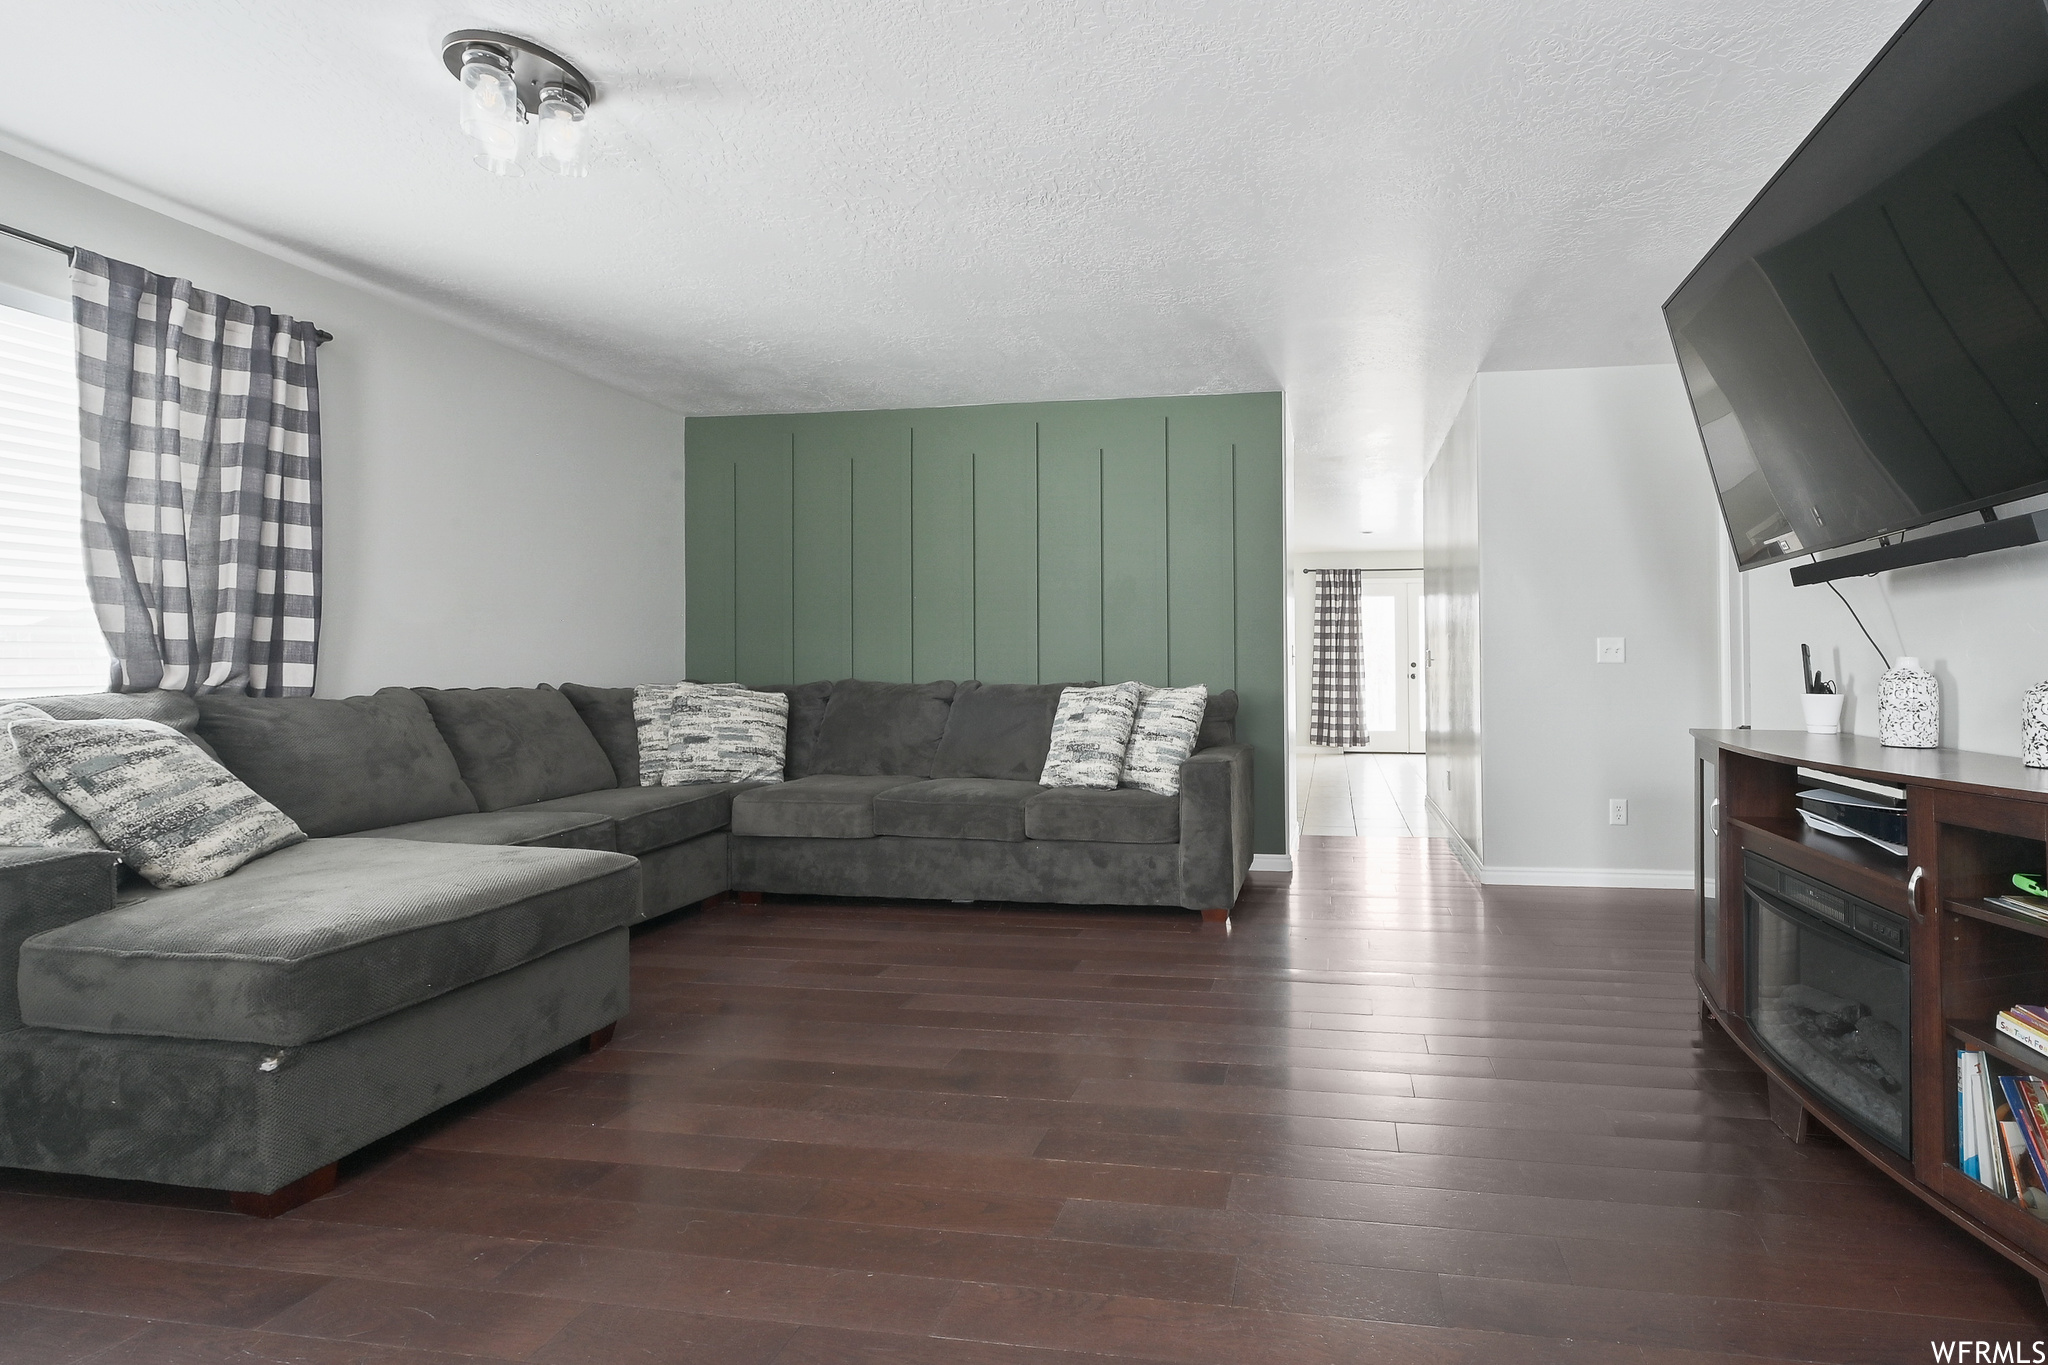 Living room featuring dark wood-type flooring and a textured ceiling